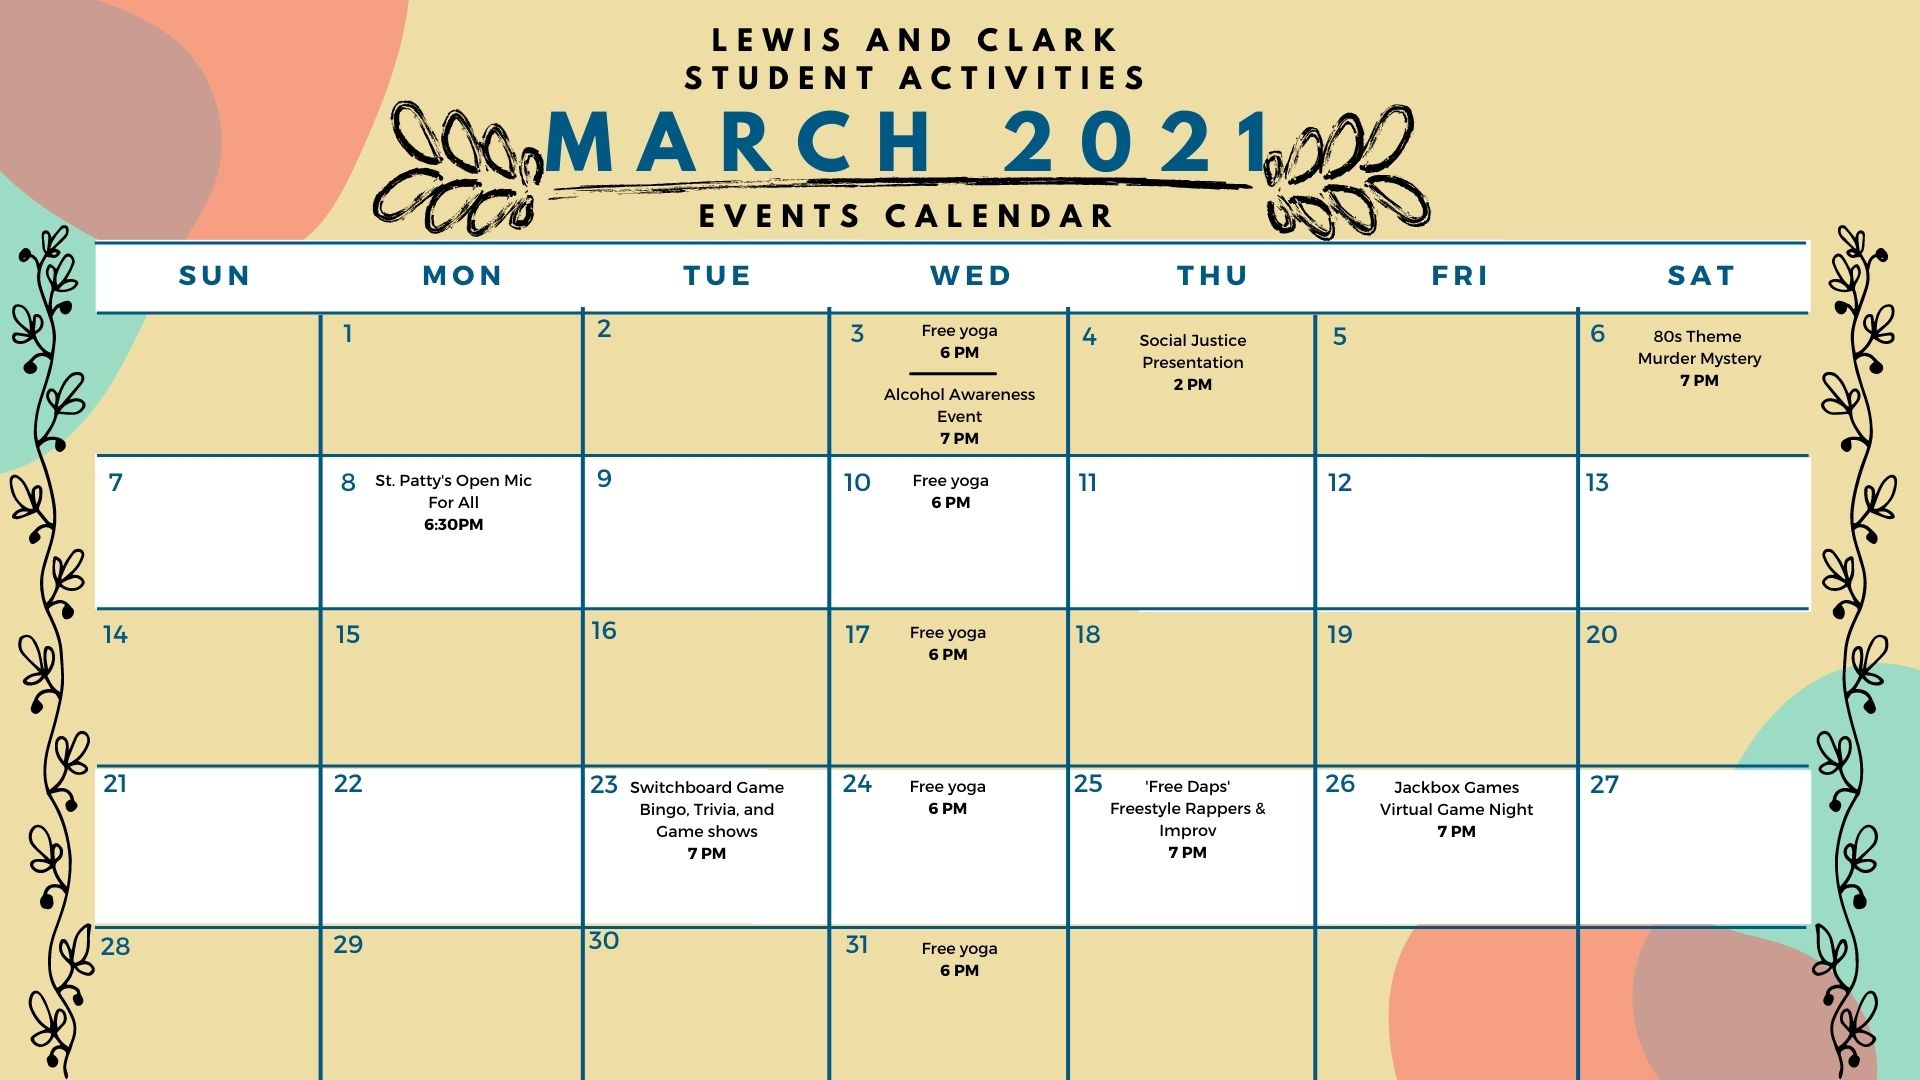 S A Events Calendar For March